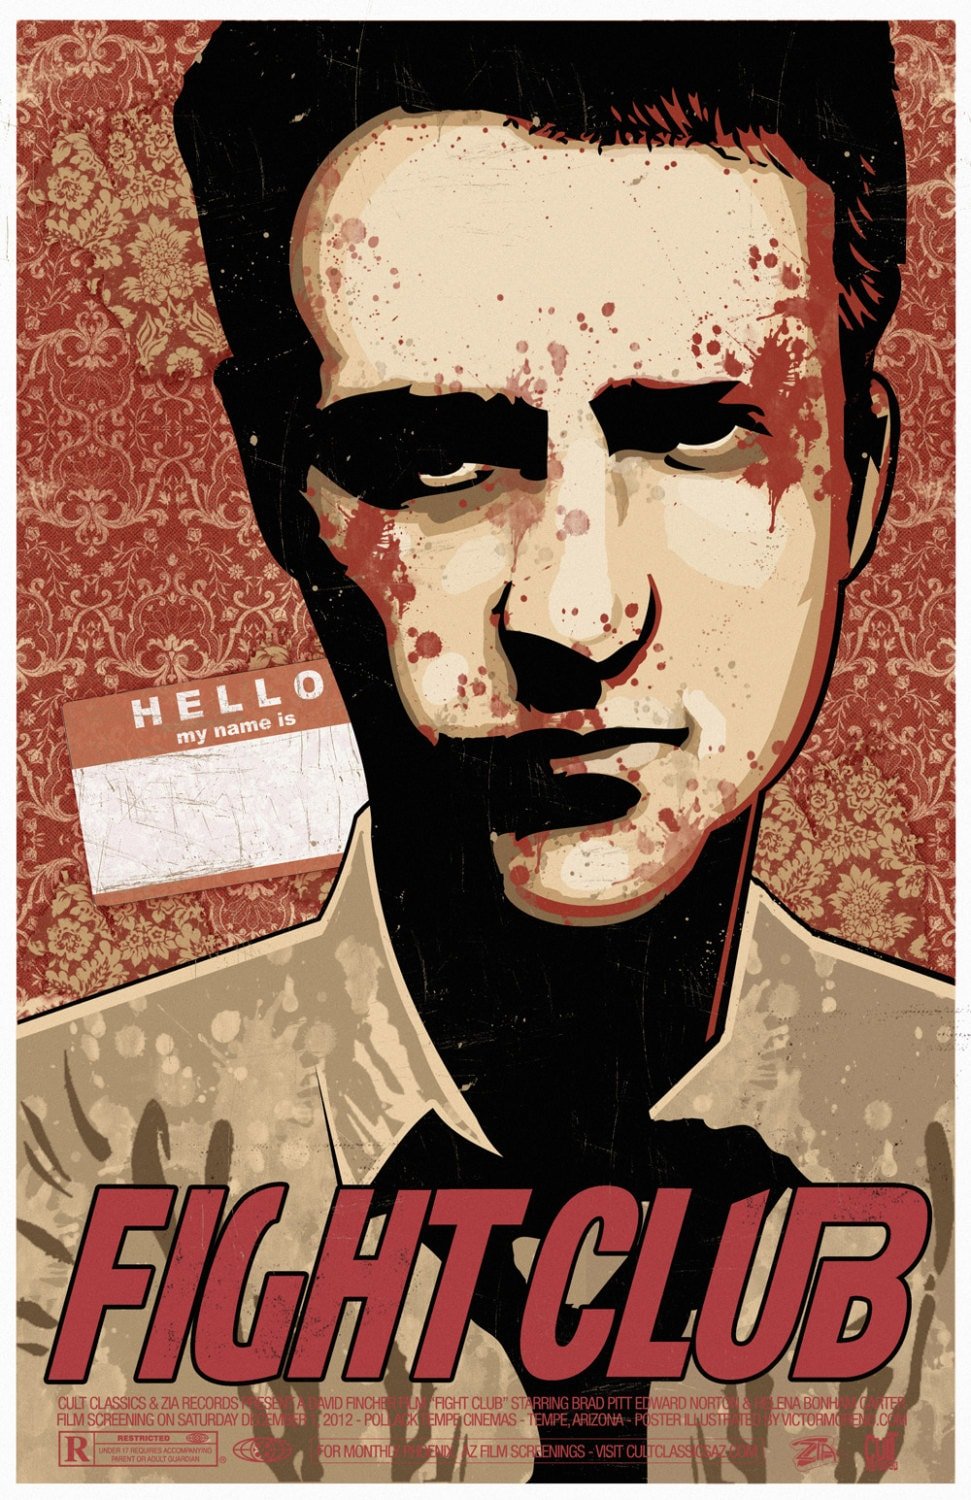 Fight Club - Narrator  - 11 x 17 Limited Edition Giclee Poster Print